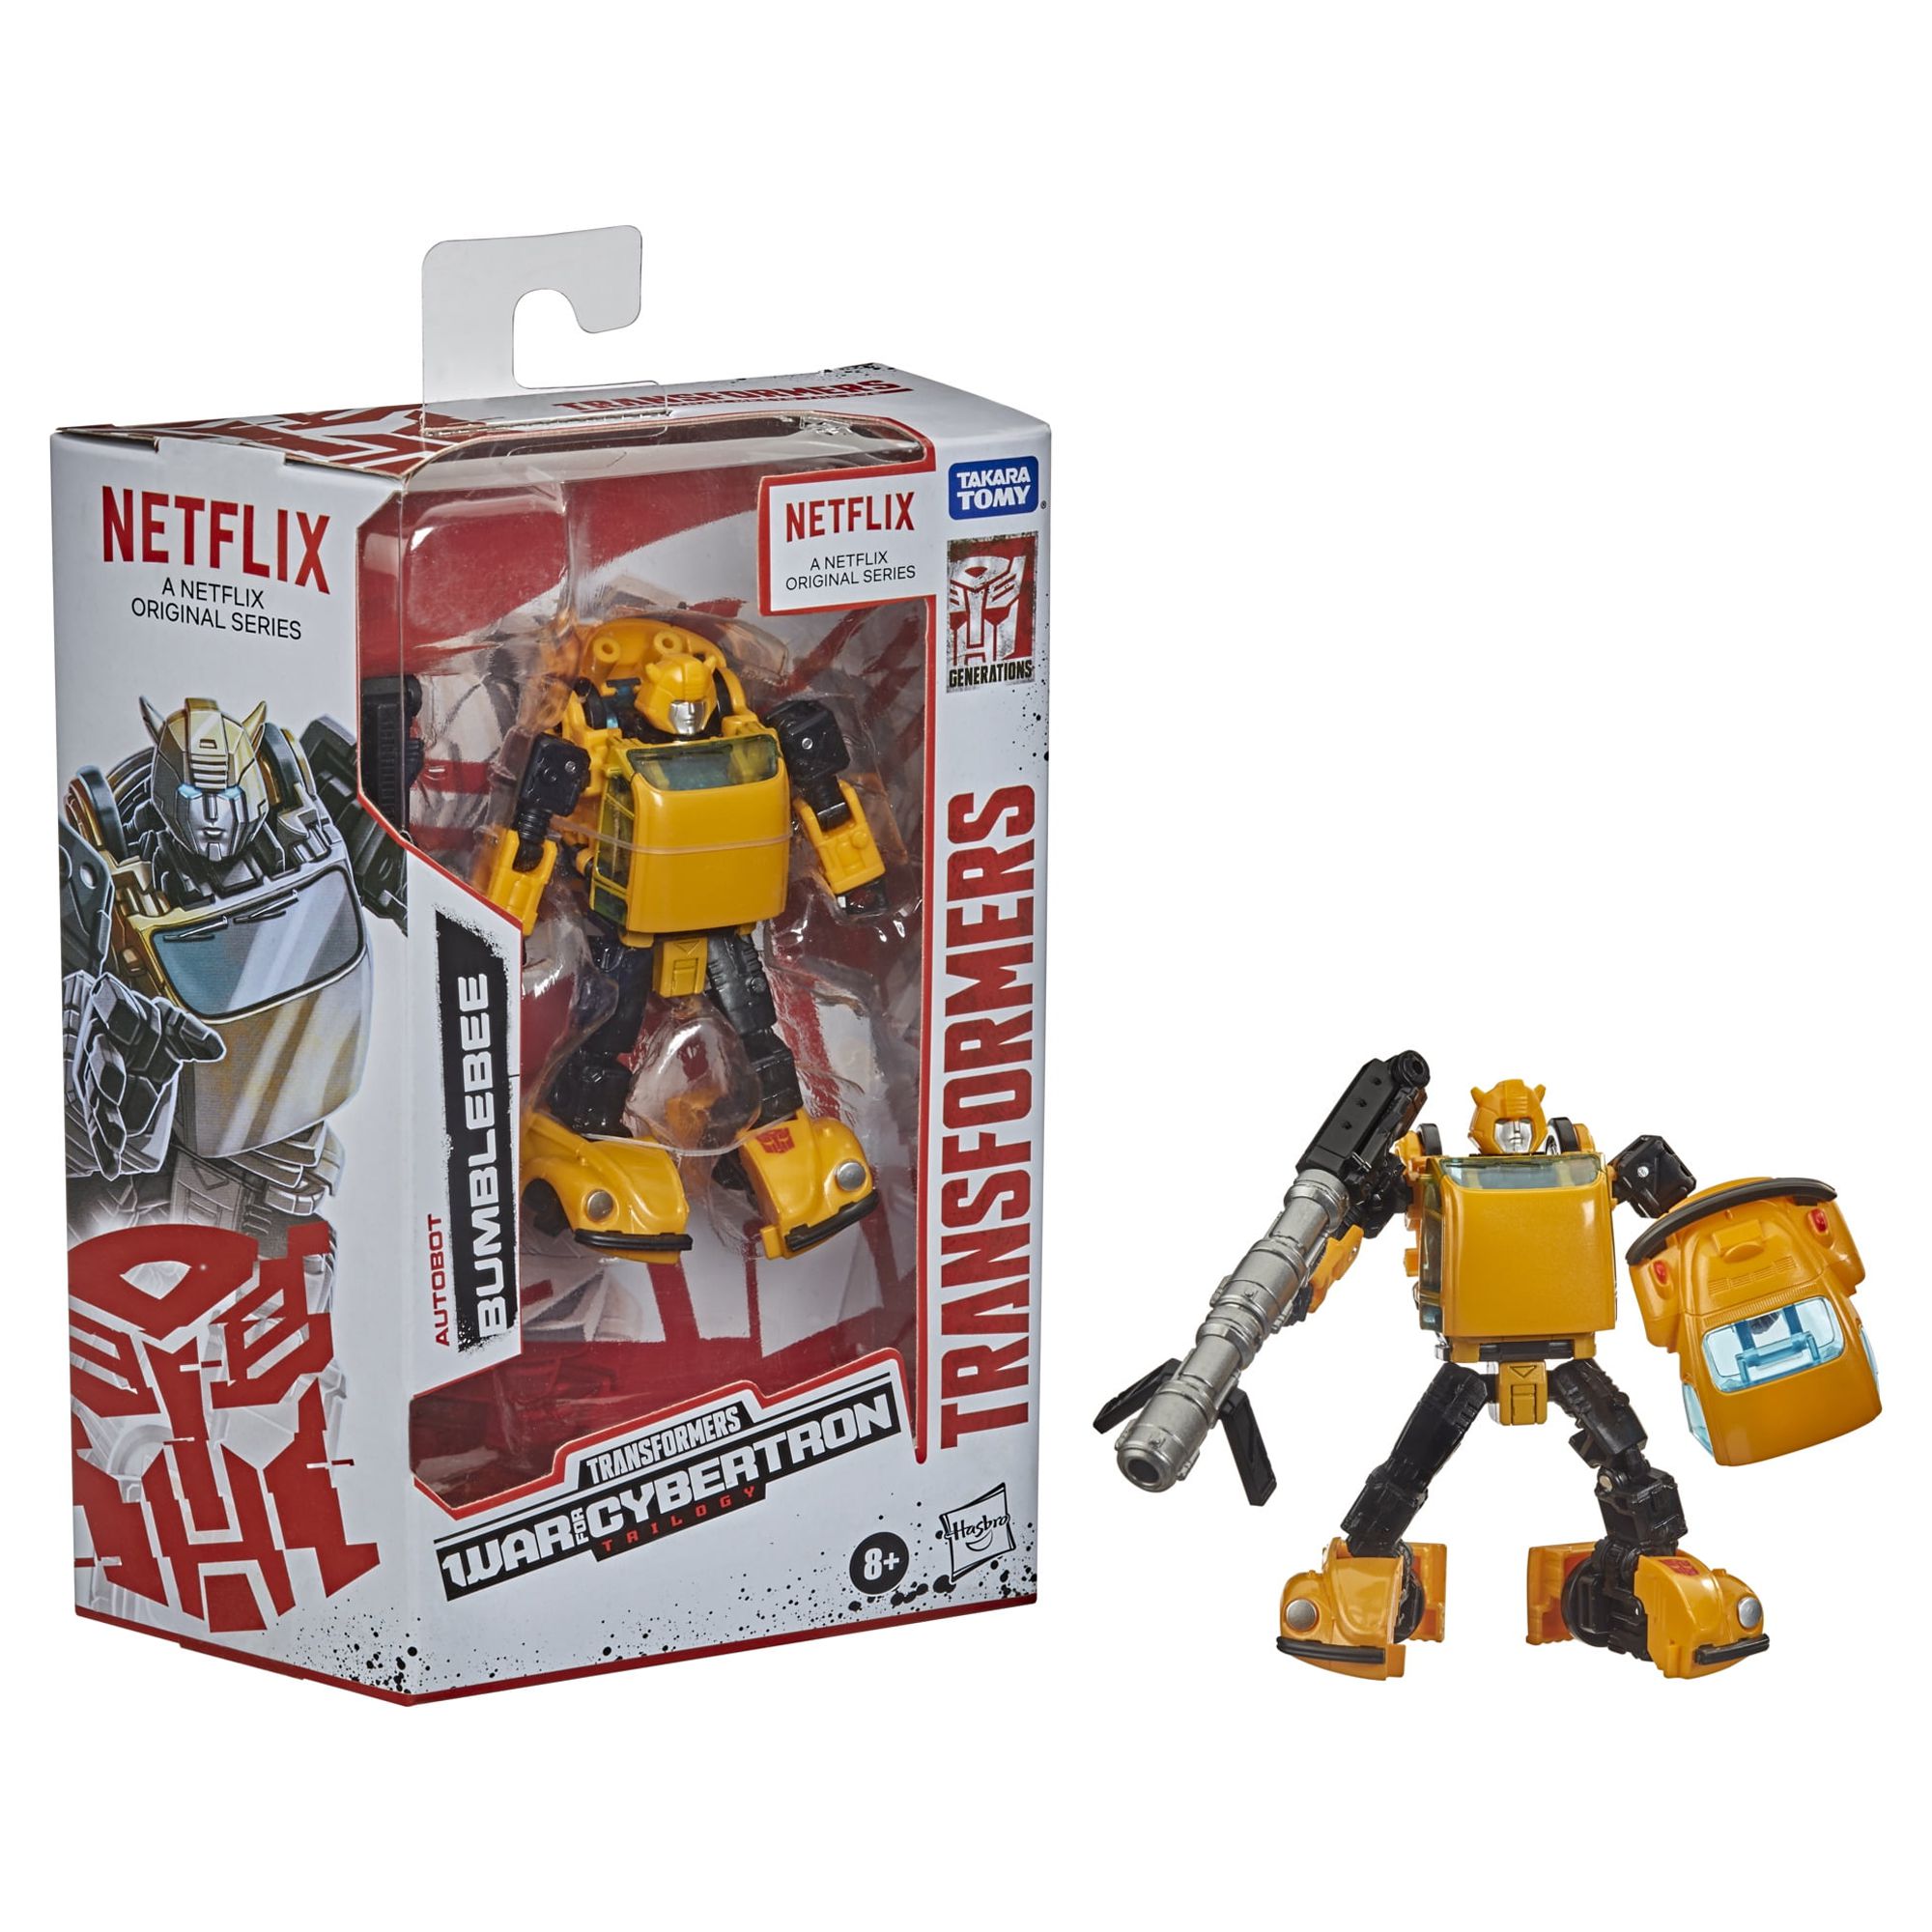 Transformers Generations War for Cybertron Trilogy Series-Inspired Deluxe Bumblebee Figure - image 1 of 5